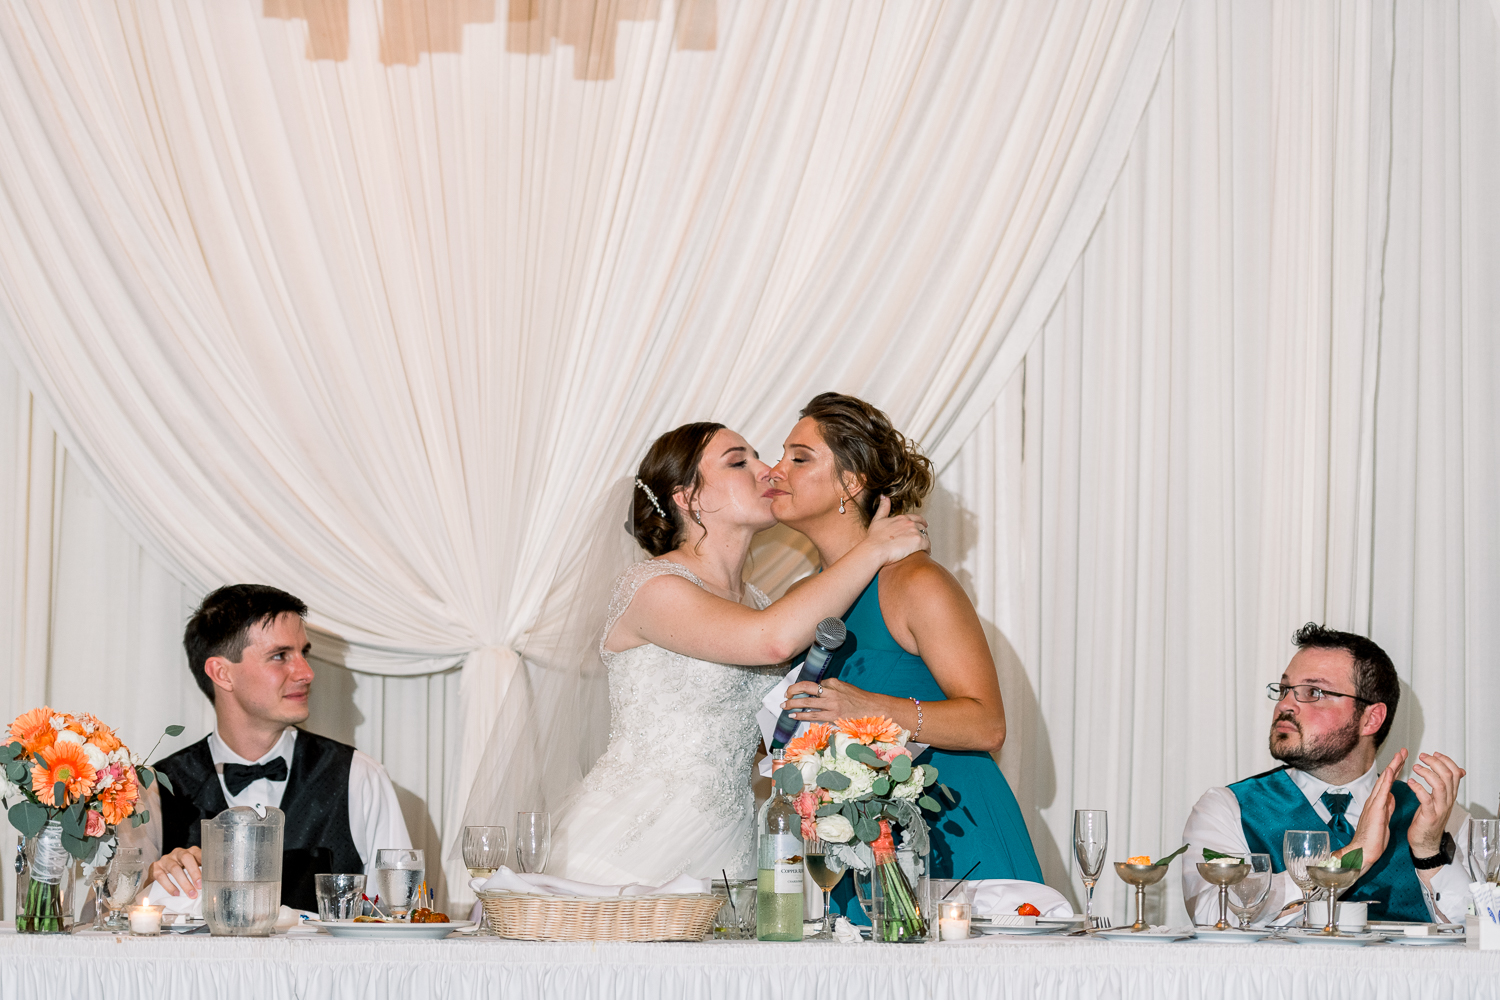 Bride kisses maid of honor in the cheek after her speech